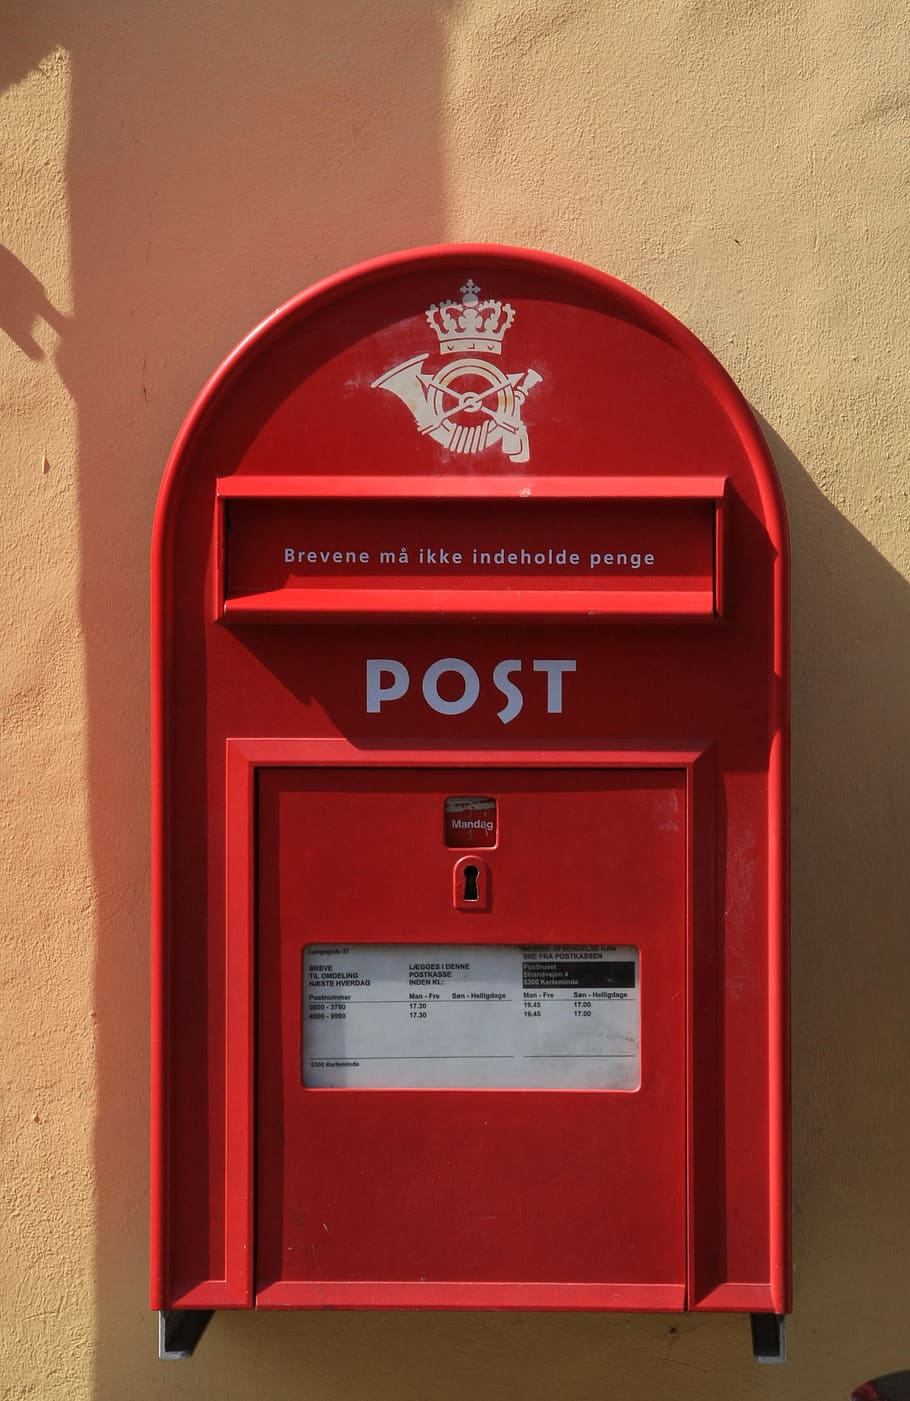 Postbox, Mail, Mailbox, Post, Box, red, post, box, letter, letterbox, postal